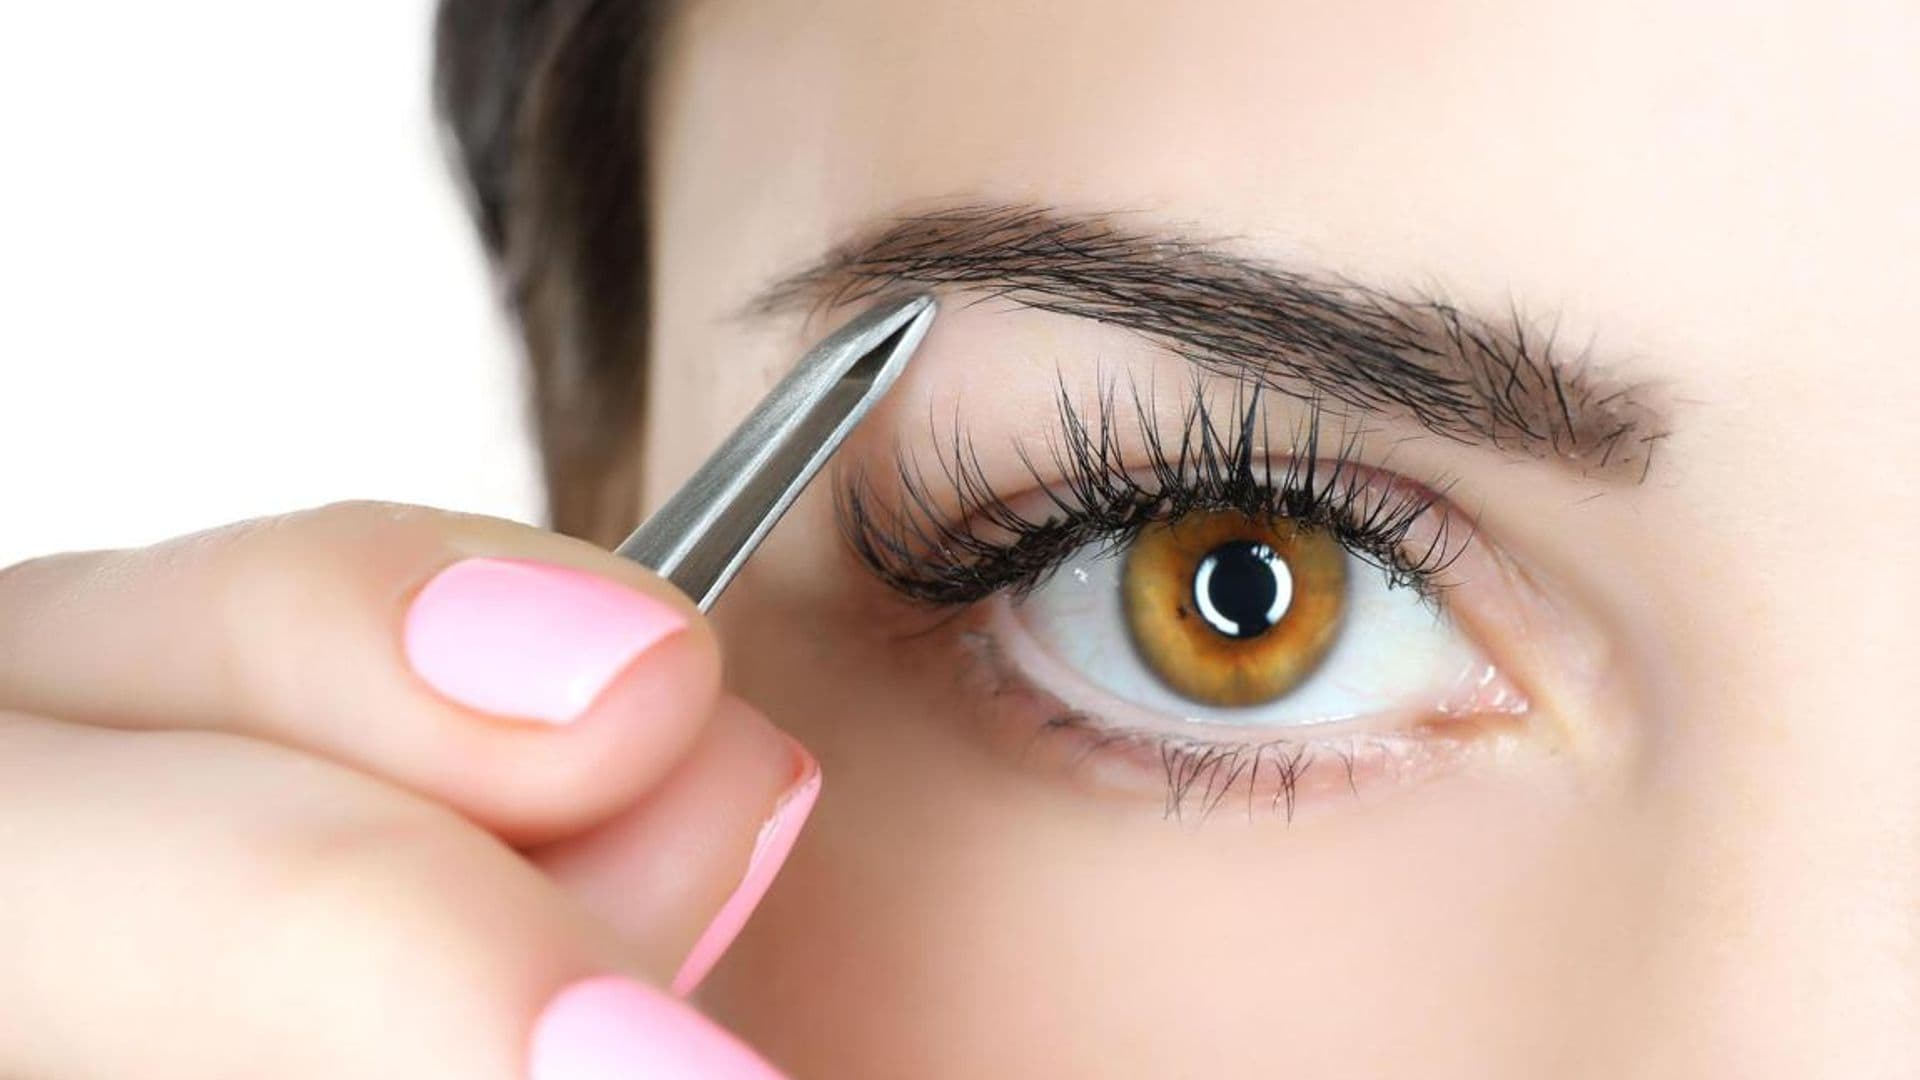 Pluck your eyebrows at home like an expert in 6 easy steps